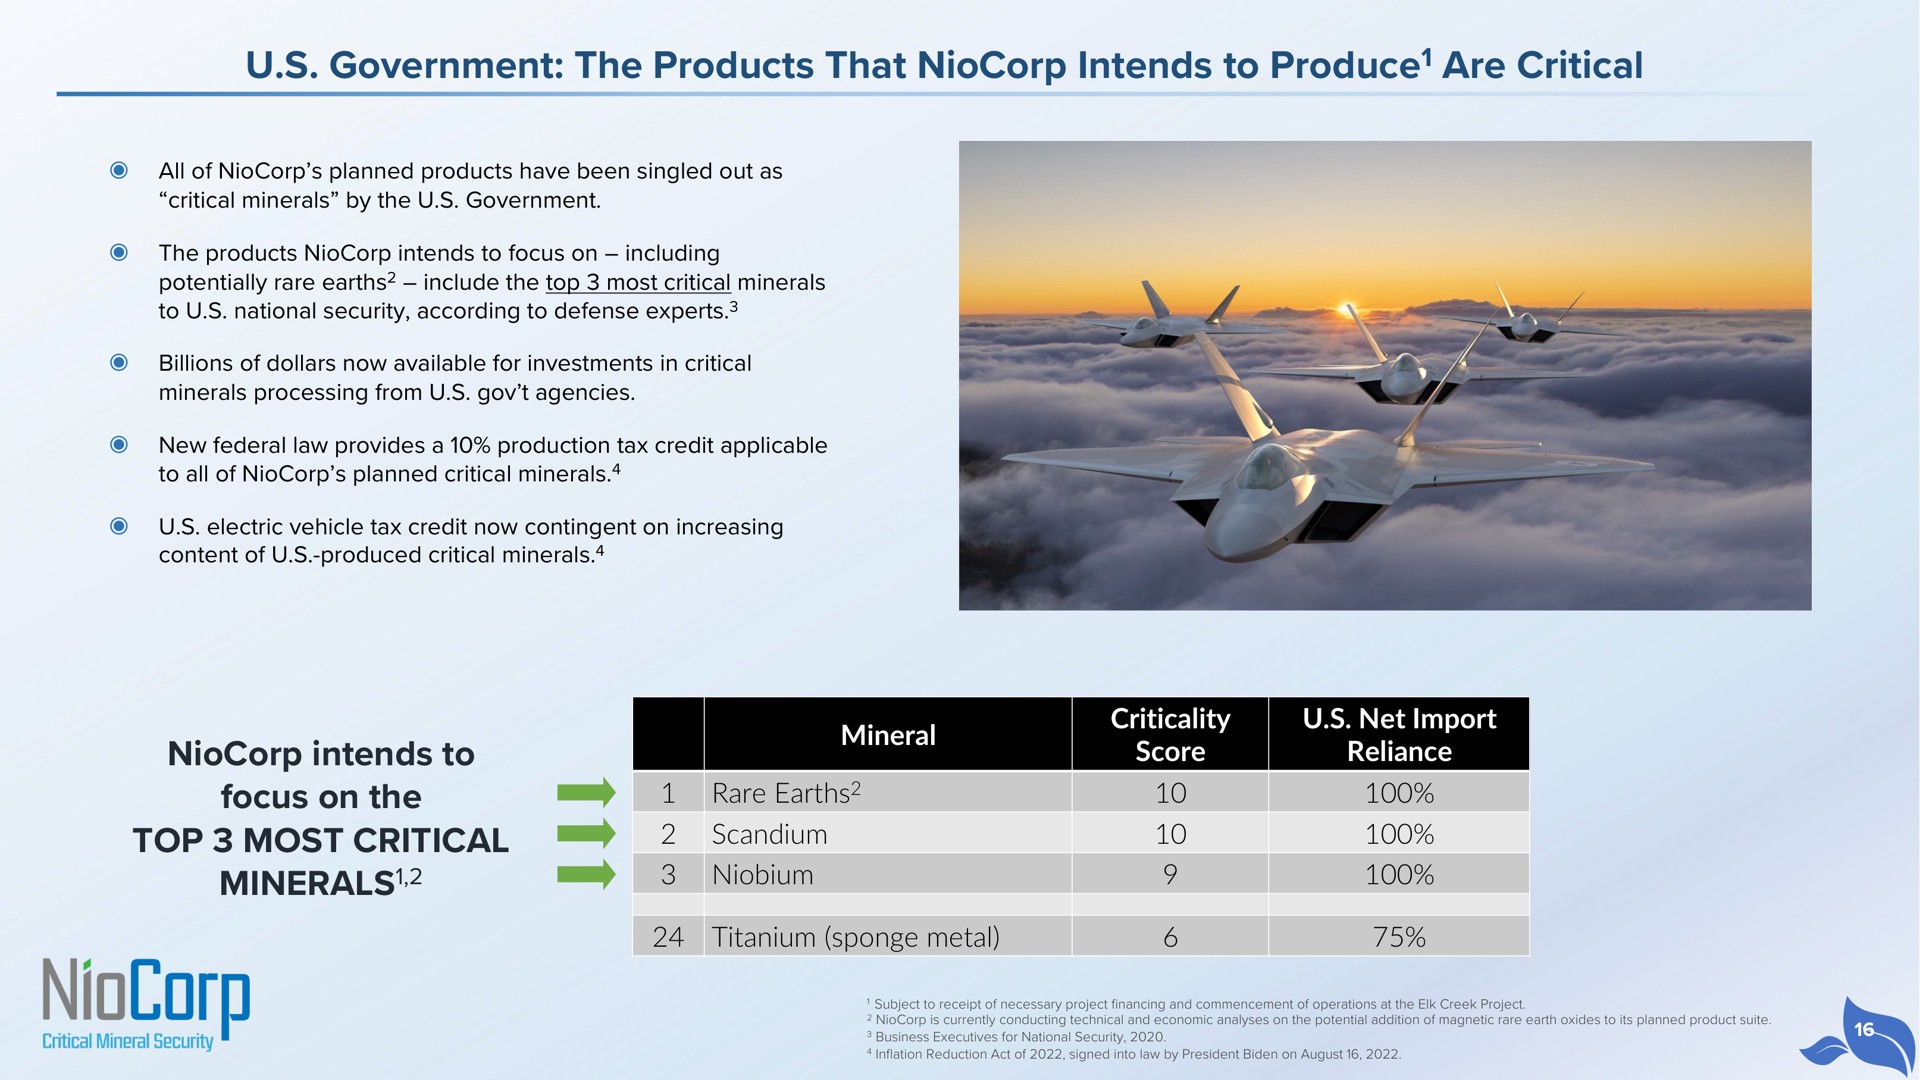 government the products that intends to produce are critical intends to focus on the top most critical minerals produce minerals am rare earths scandium niobium bile one i | NioCorp